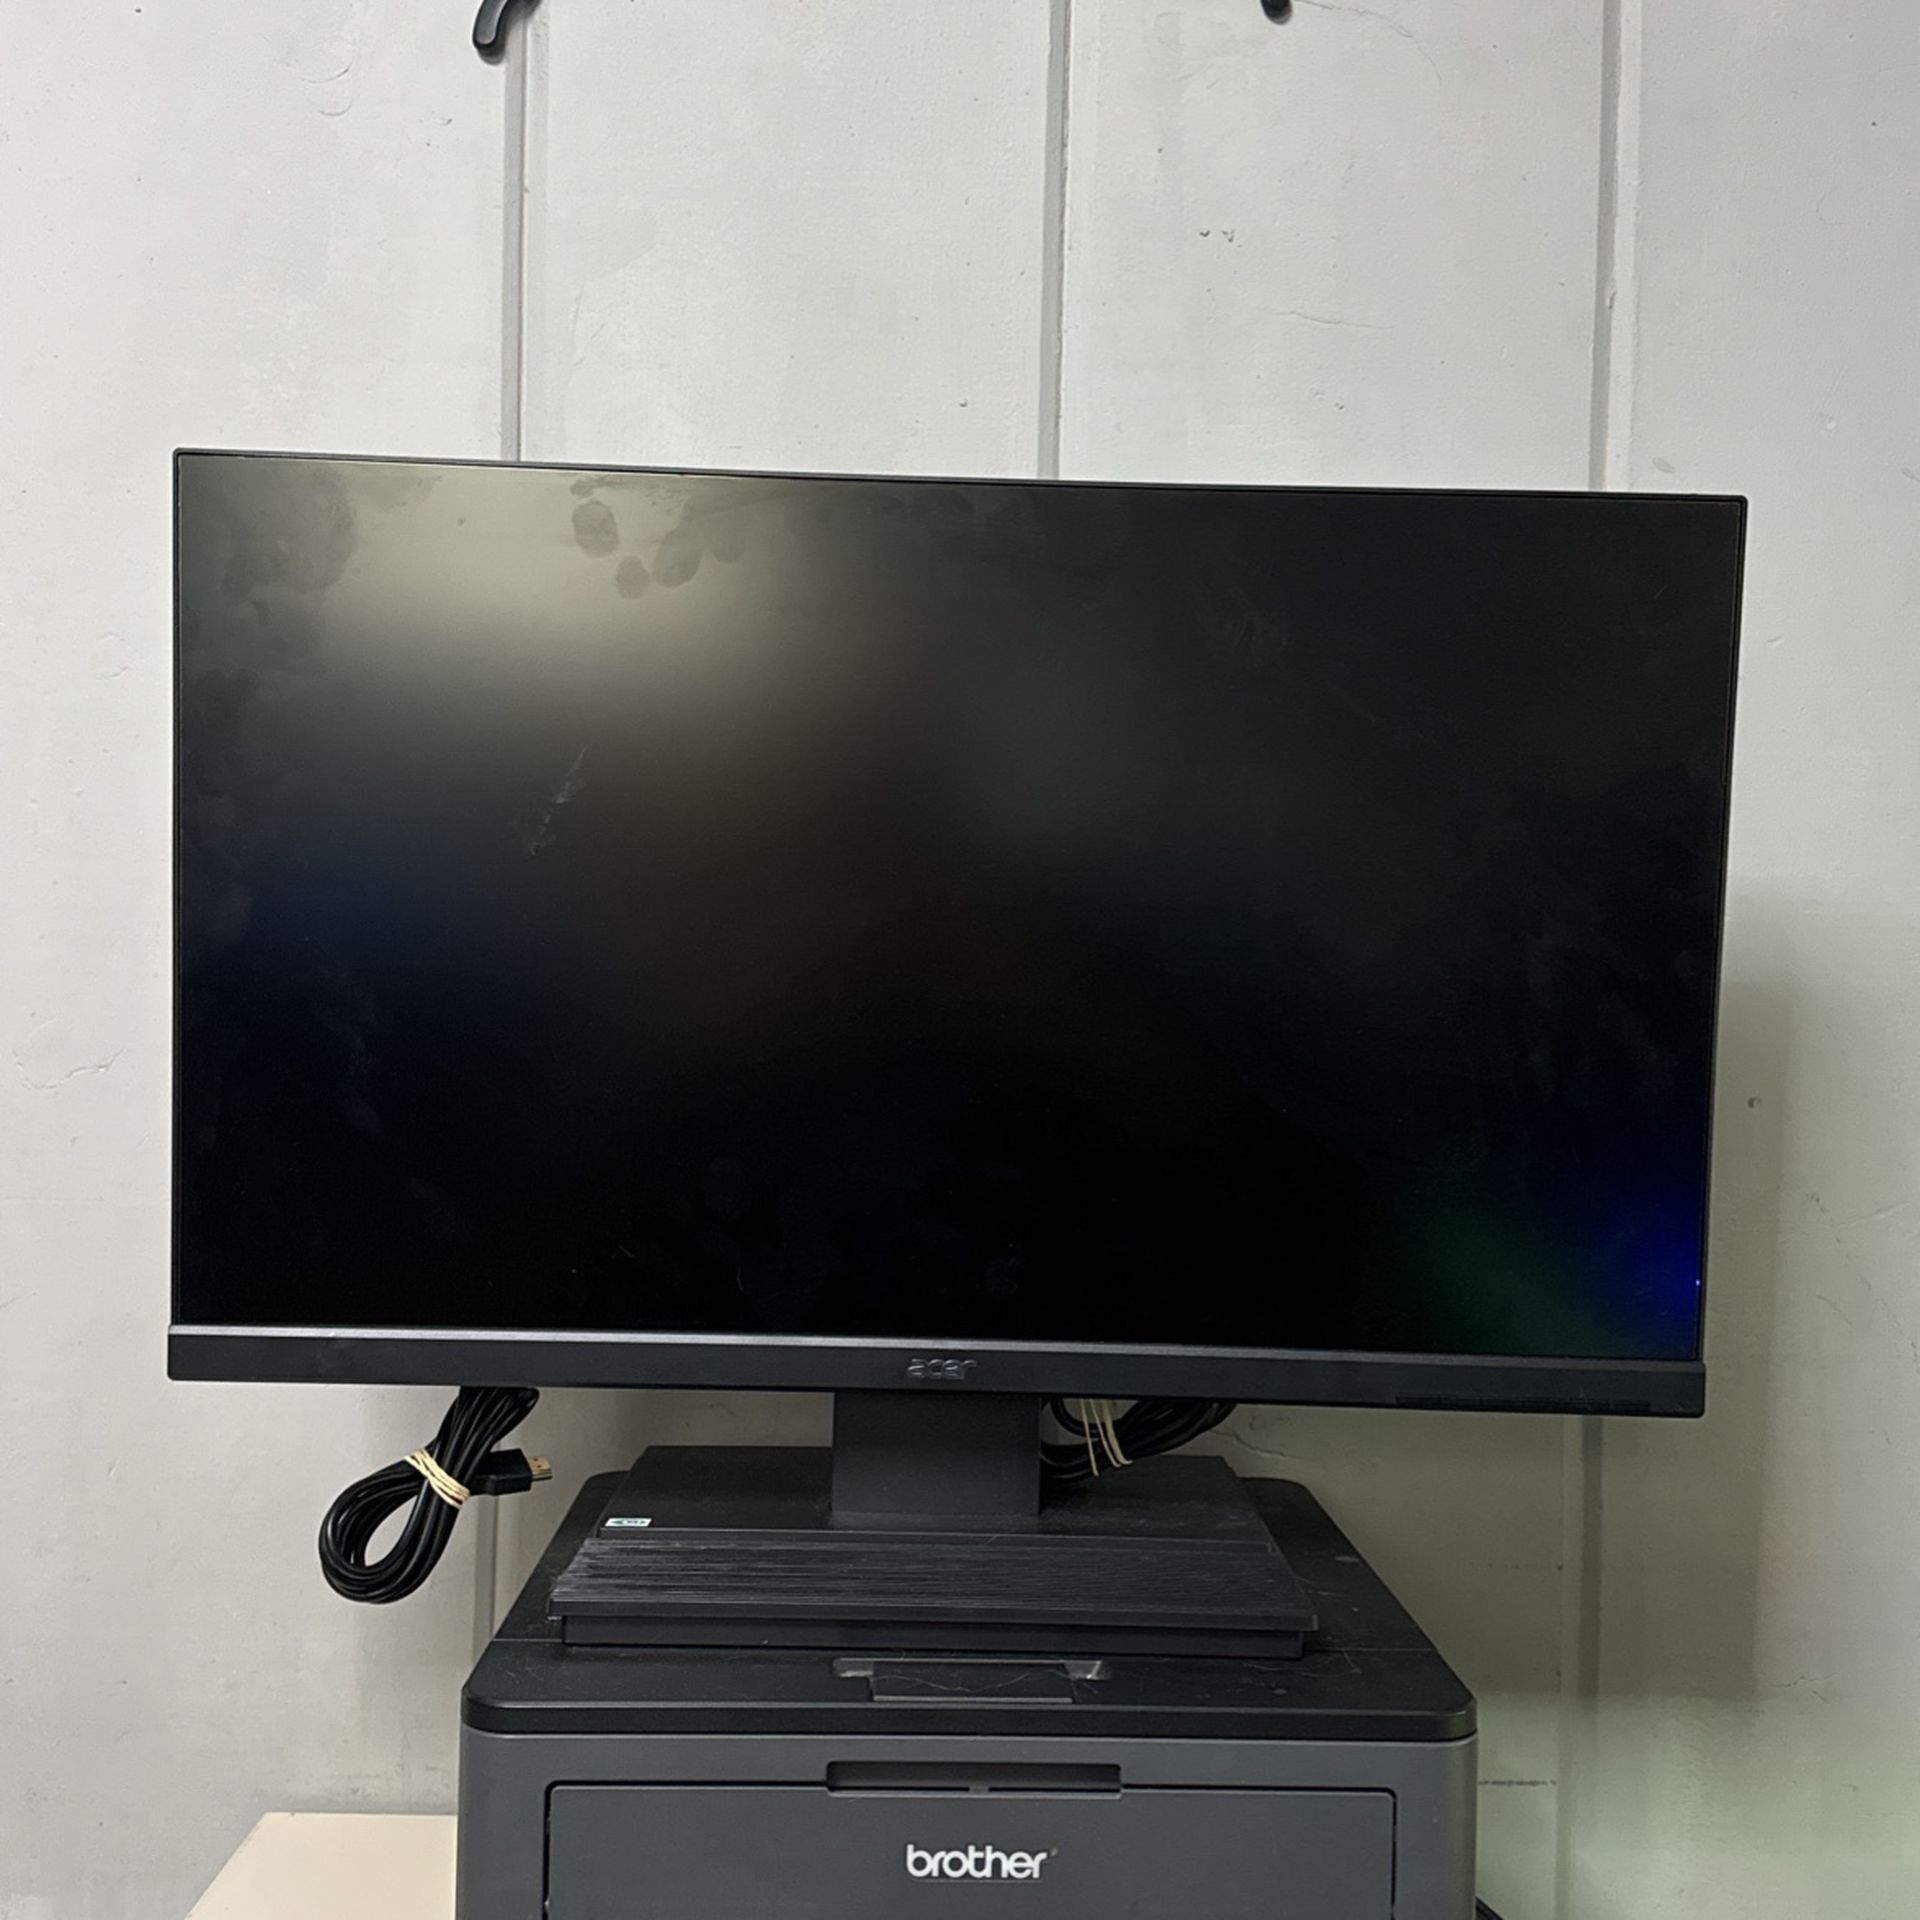 Acer 27” Computer Monitor 